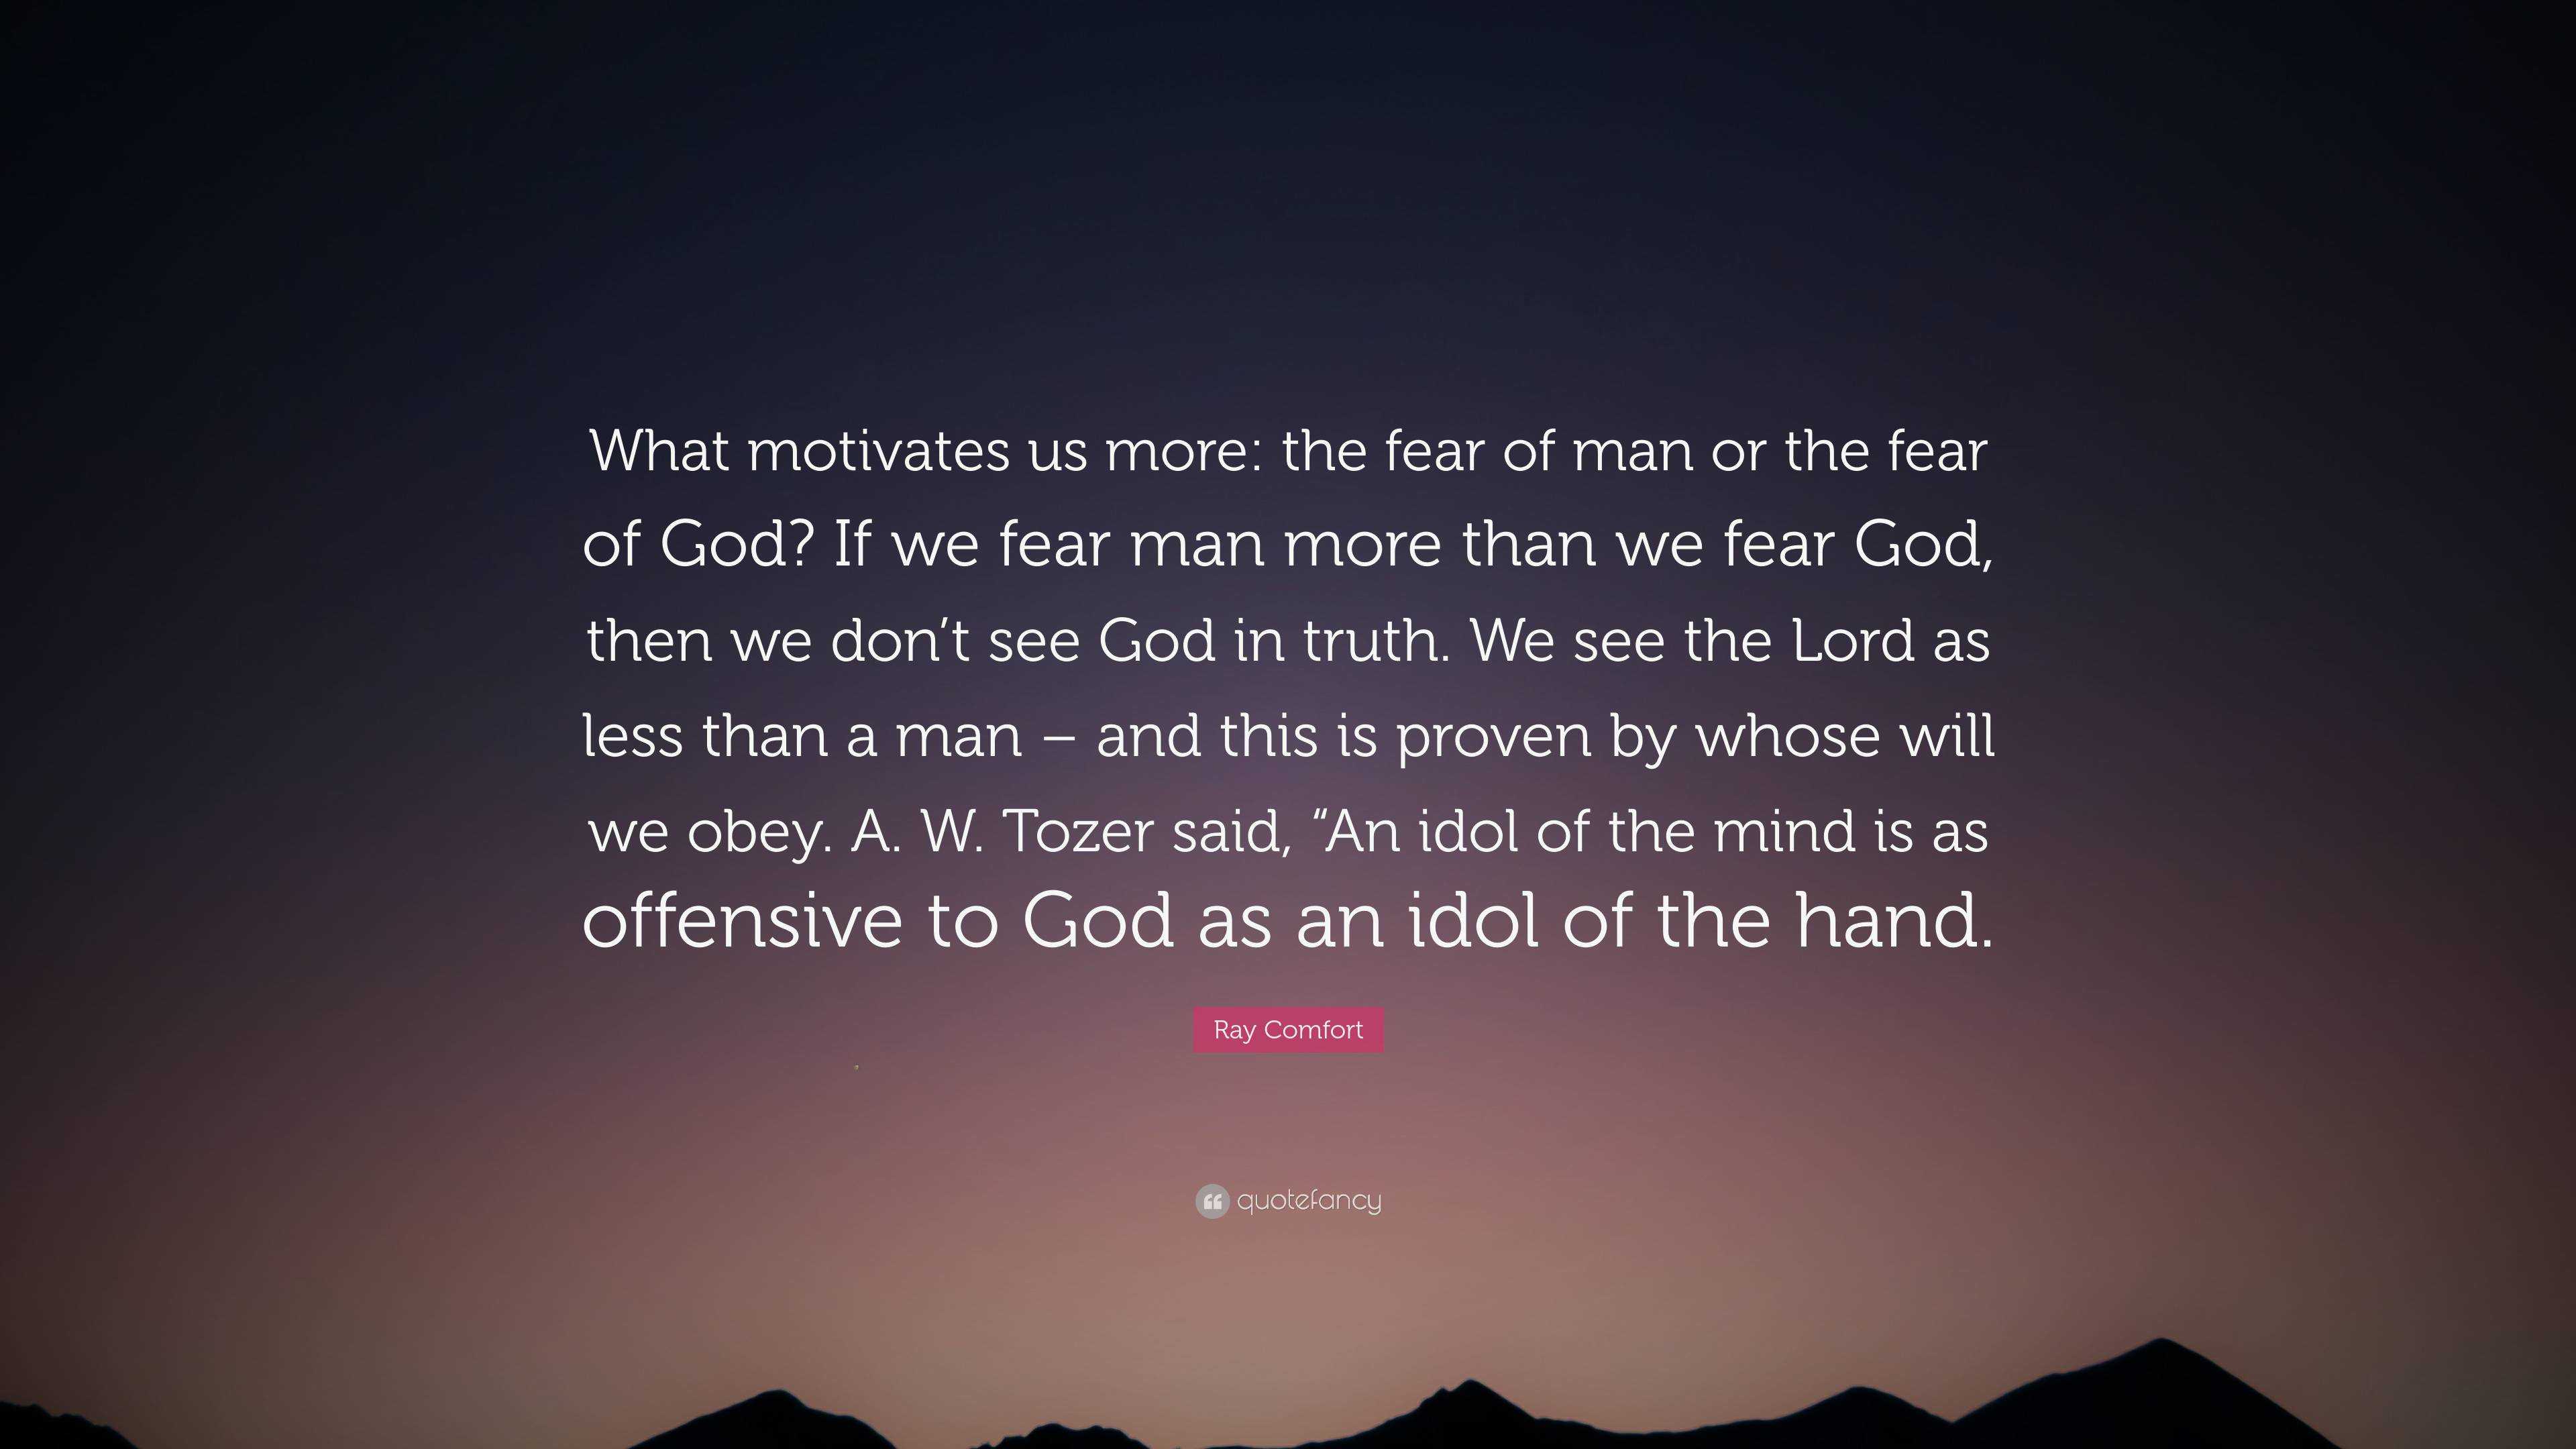 Ray Comfort Quote: “What motivates us more: the fear of man or the fear of  God? If we fear man more than we fear God, then we don't see God ...”